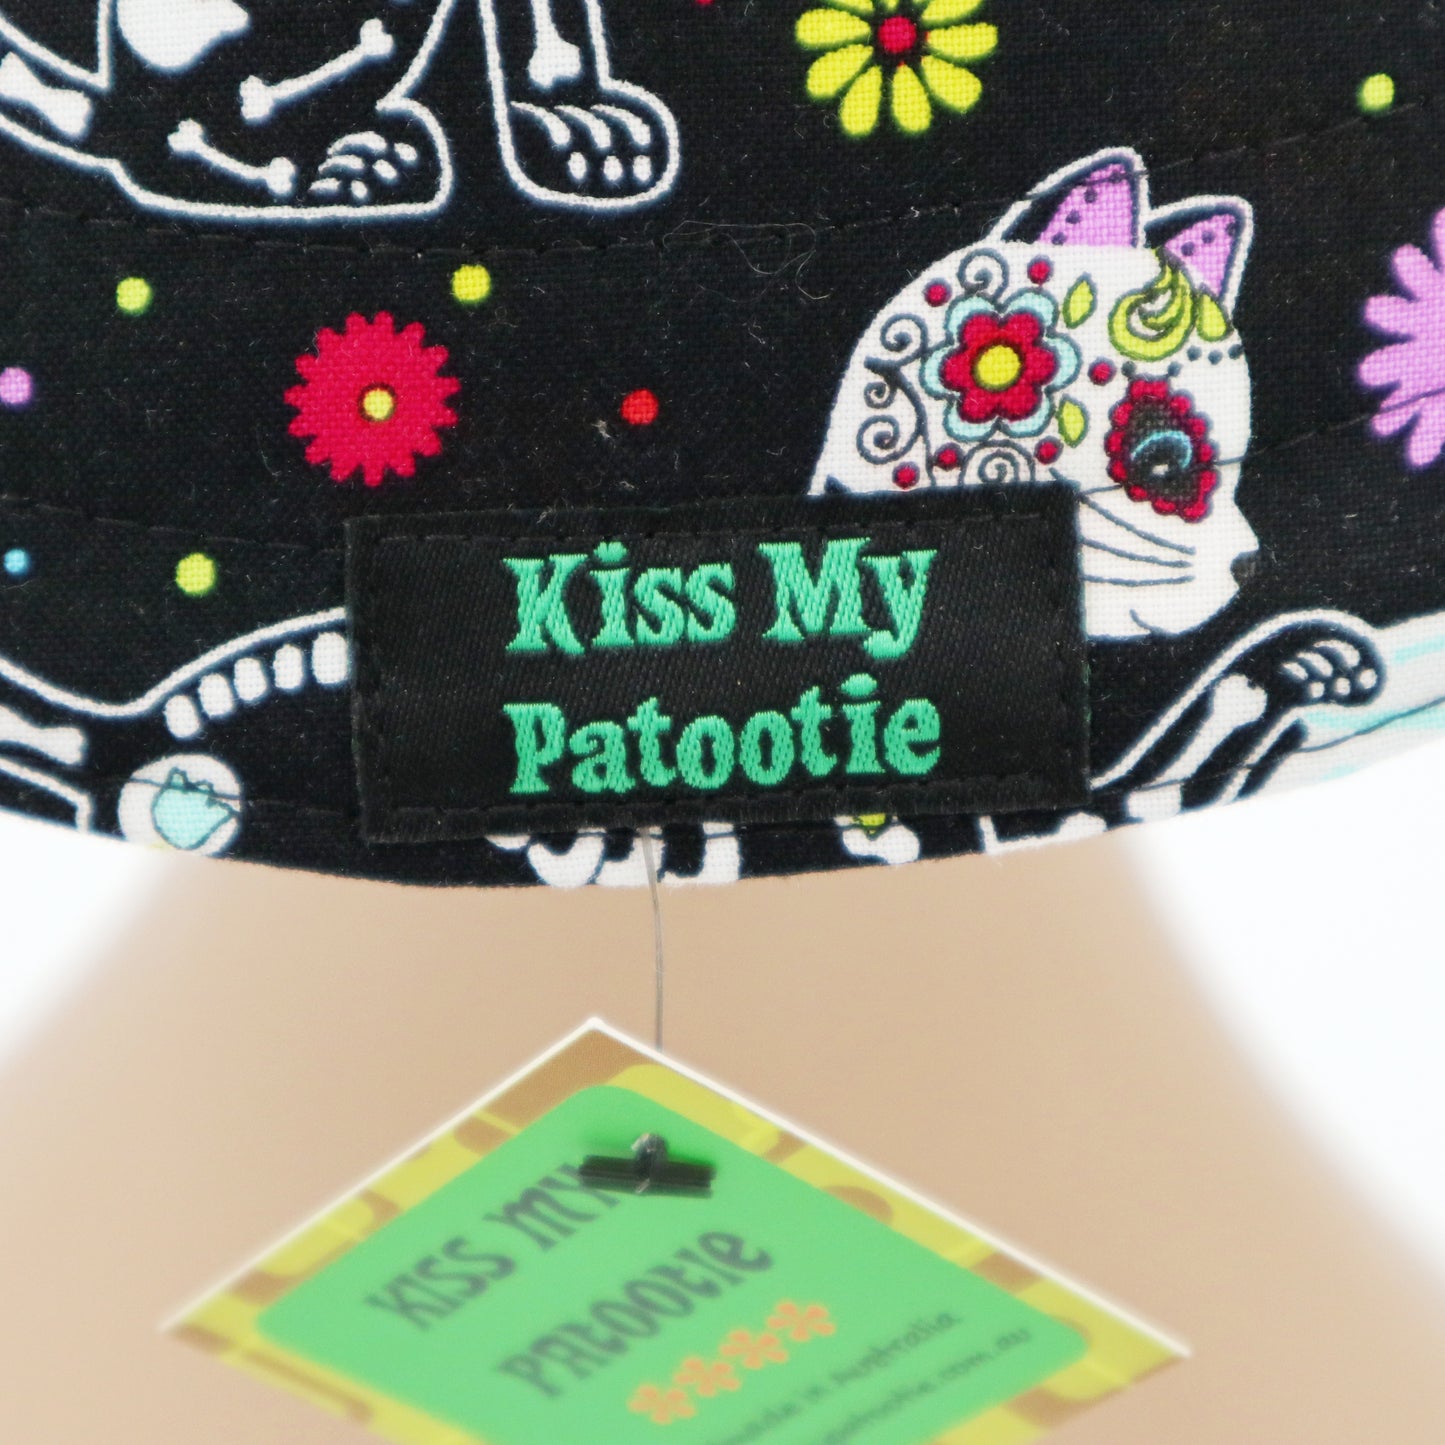 Reversible Sun Hat - Ladies & Girls sizes - day of the dead cats